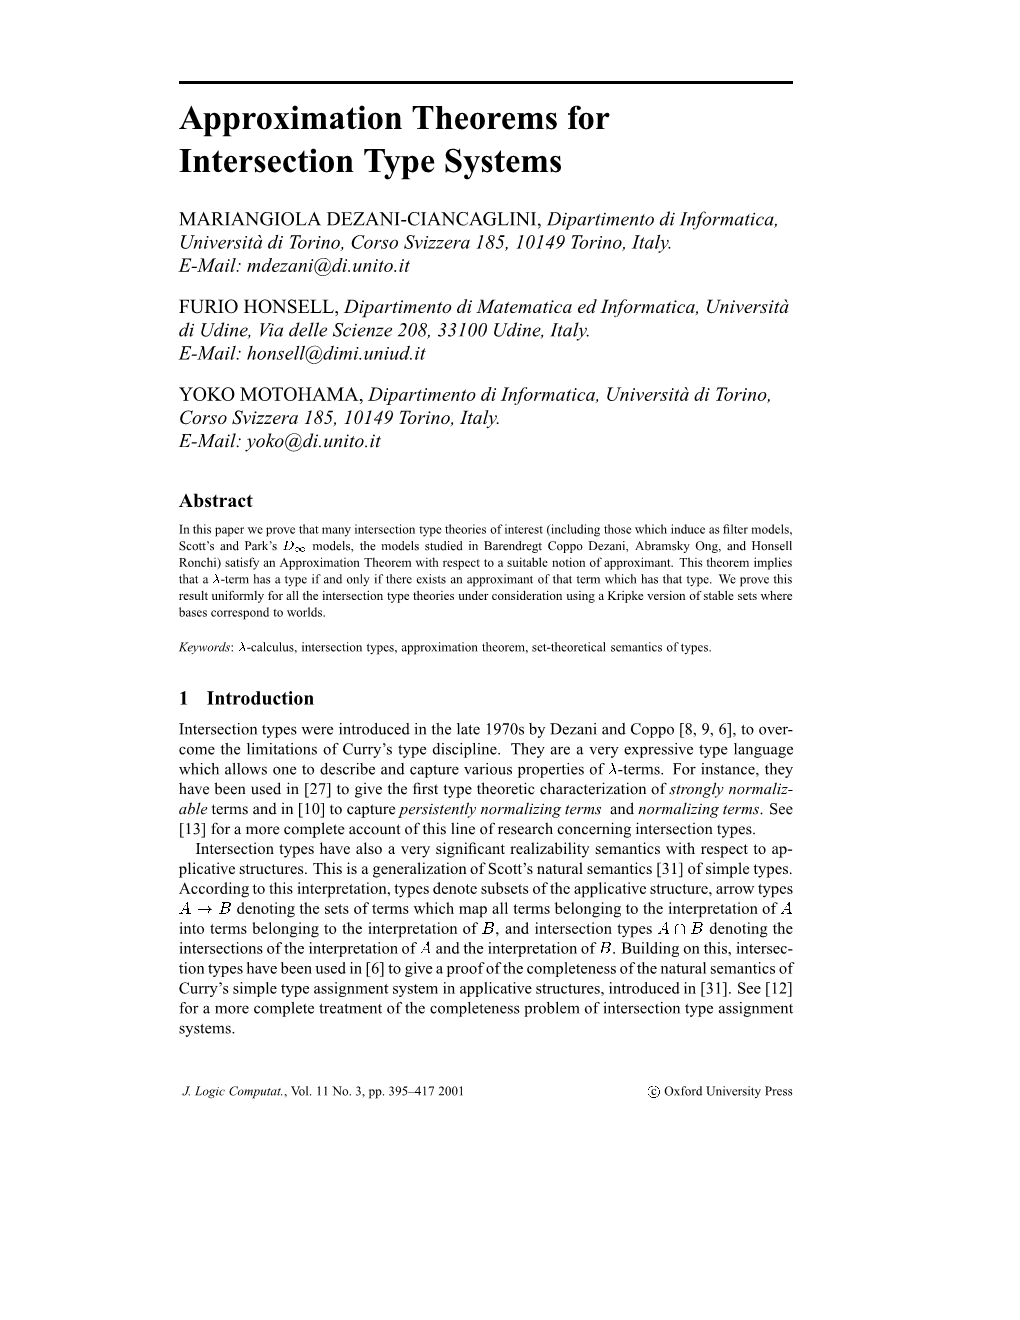 Approximation Theorems for Intersection Type Systems